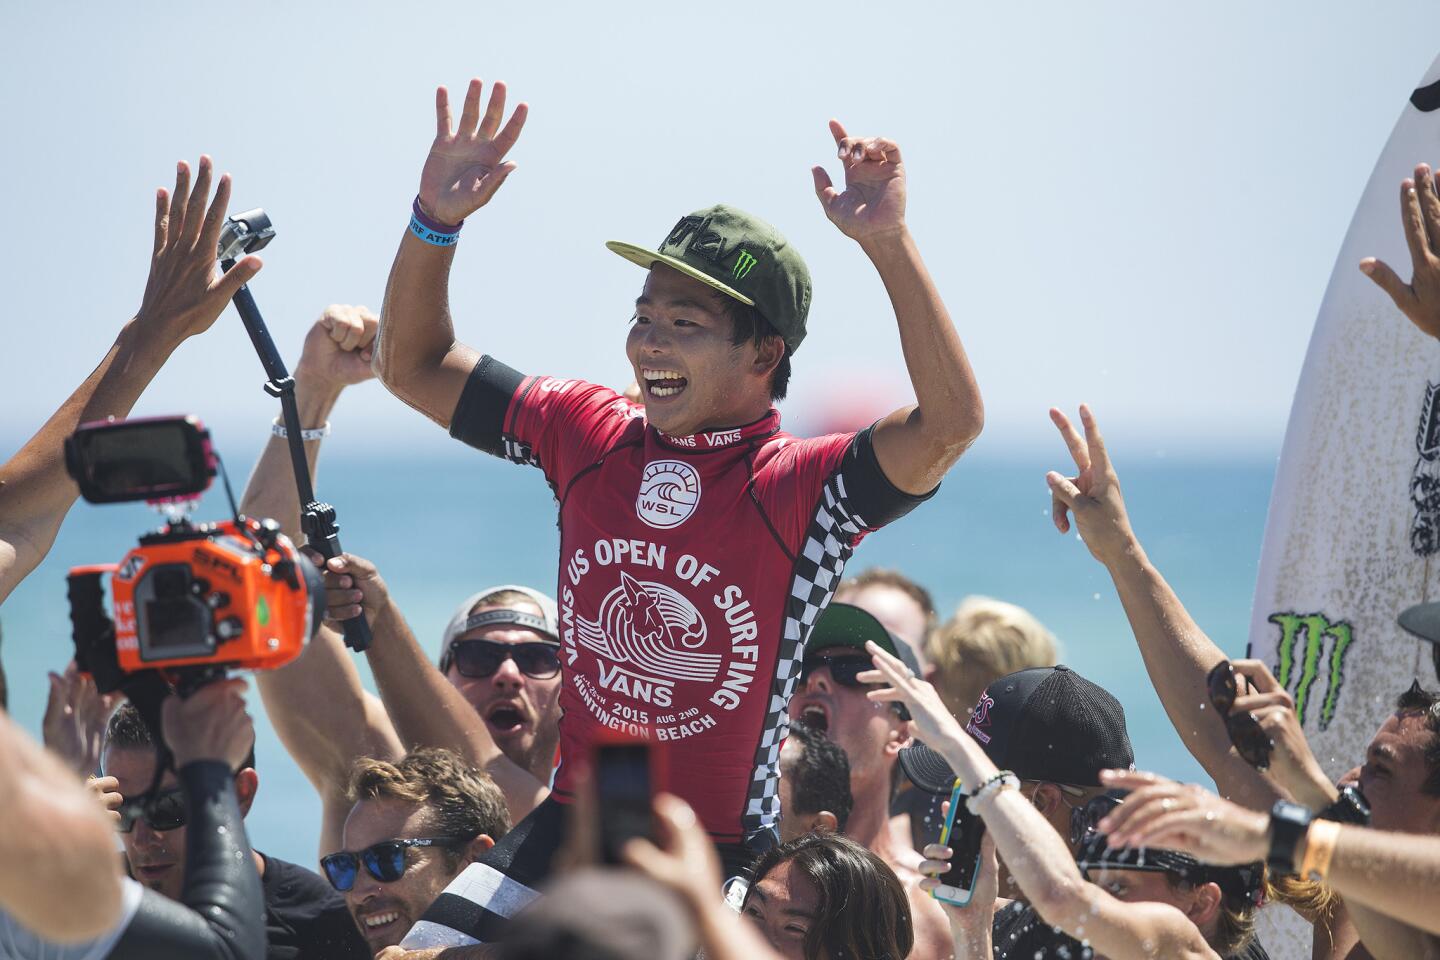 Hiroto Ohhara celebrates his victory with fans after winning the Vans U.S. Open of Surfing in Huntington Beach.